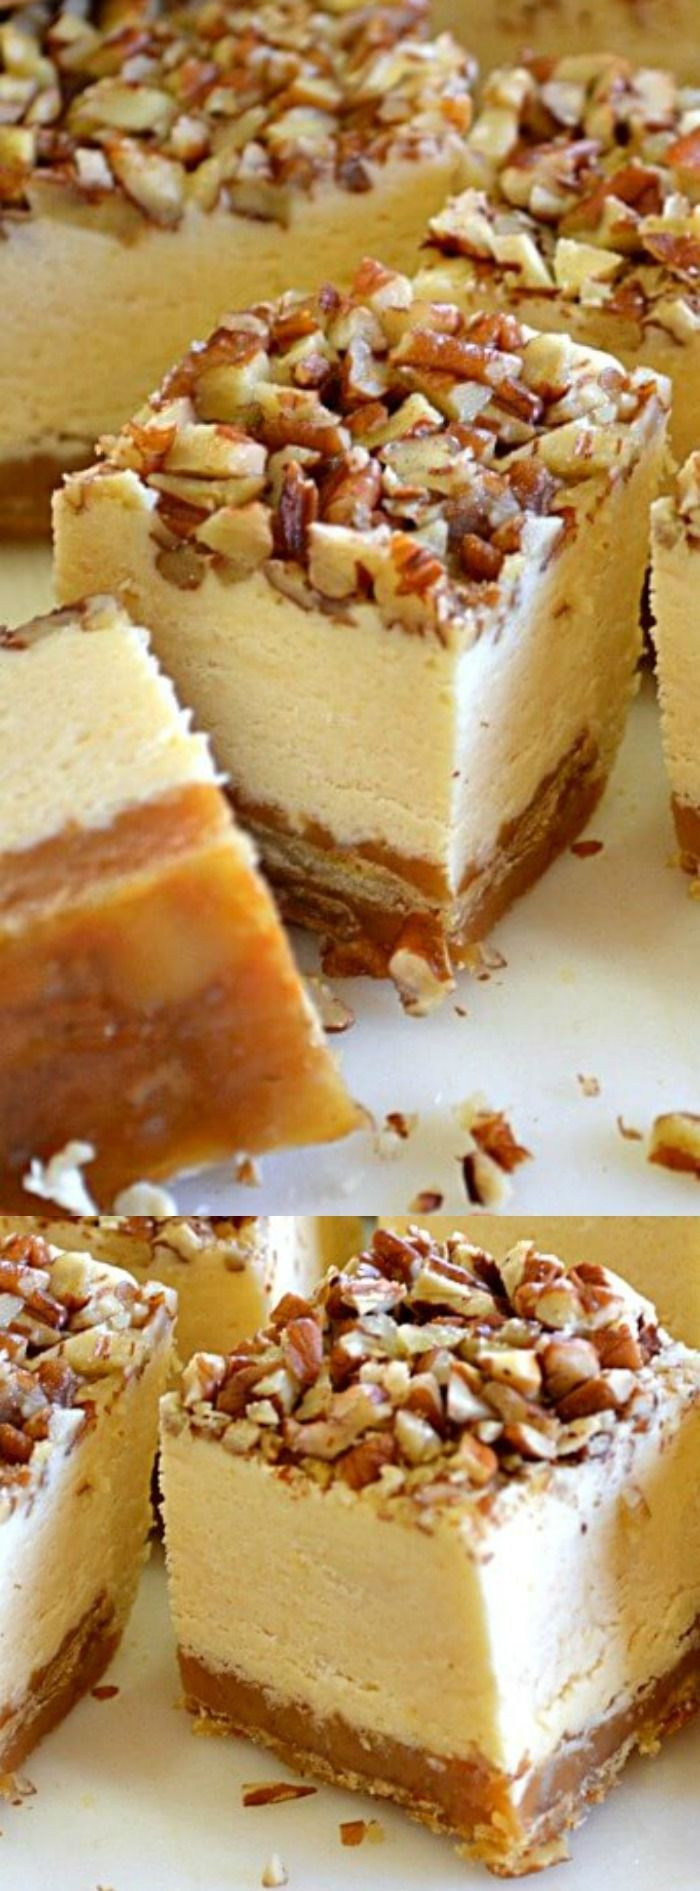 Traditional Mexican Christmas Desserts
 25 best Mexican dessert easy ideas on Pinterest